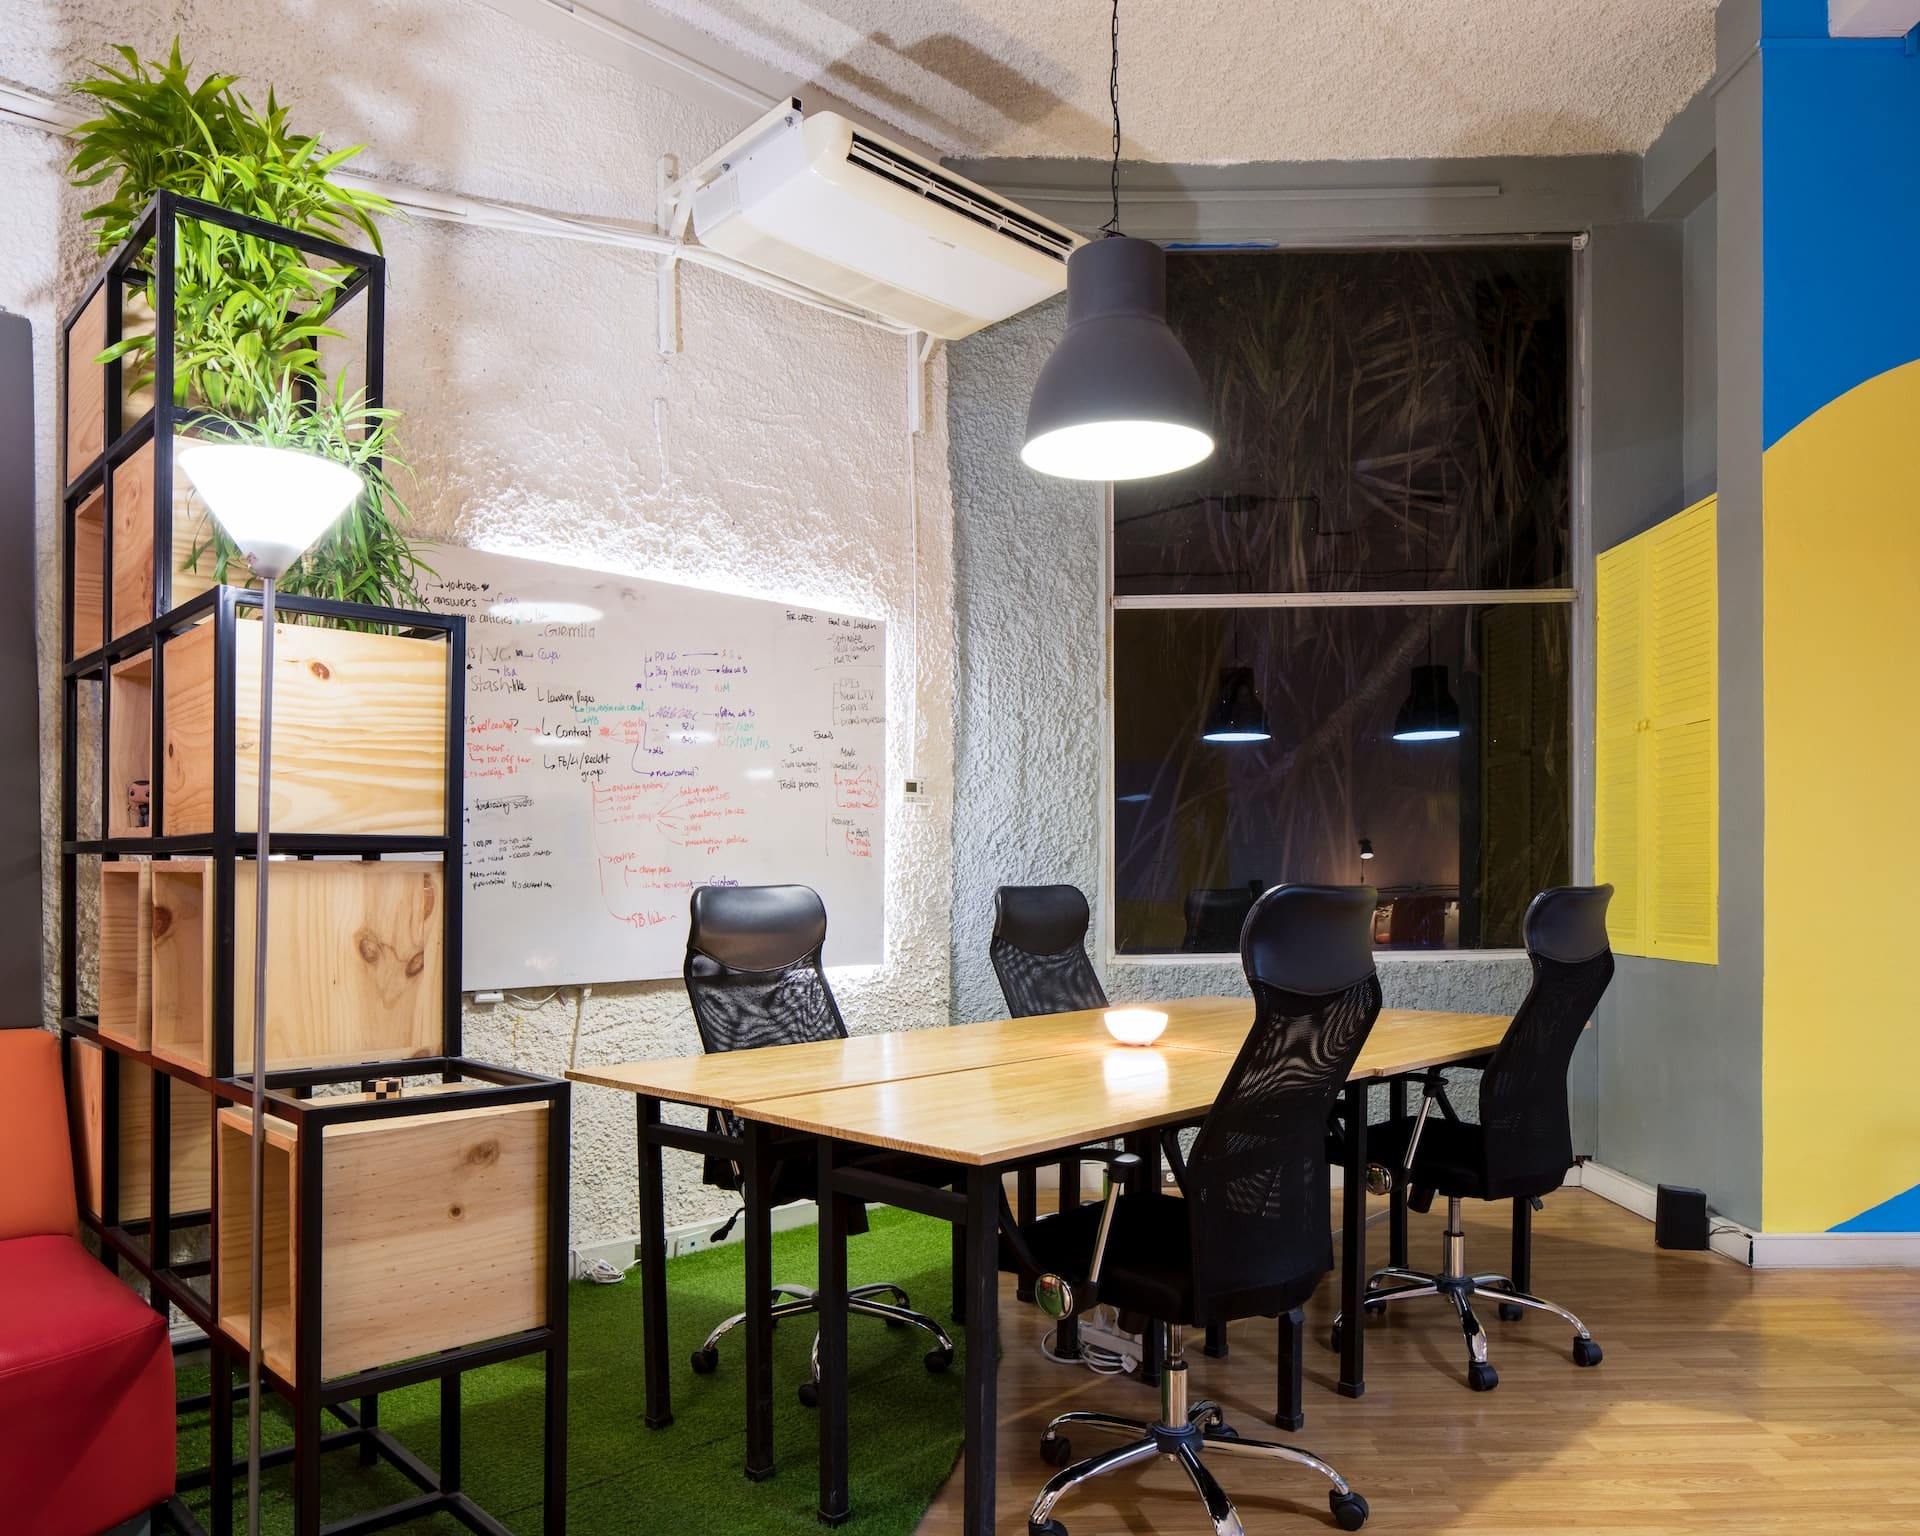 9 Ideas for Making Your Office Furniture More Sustainable